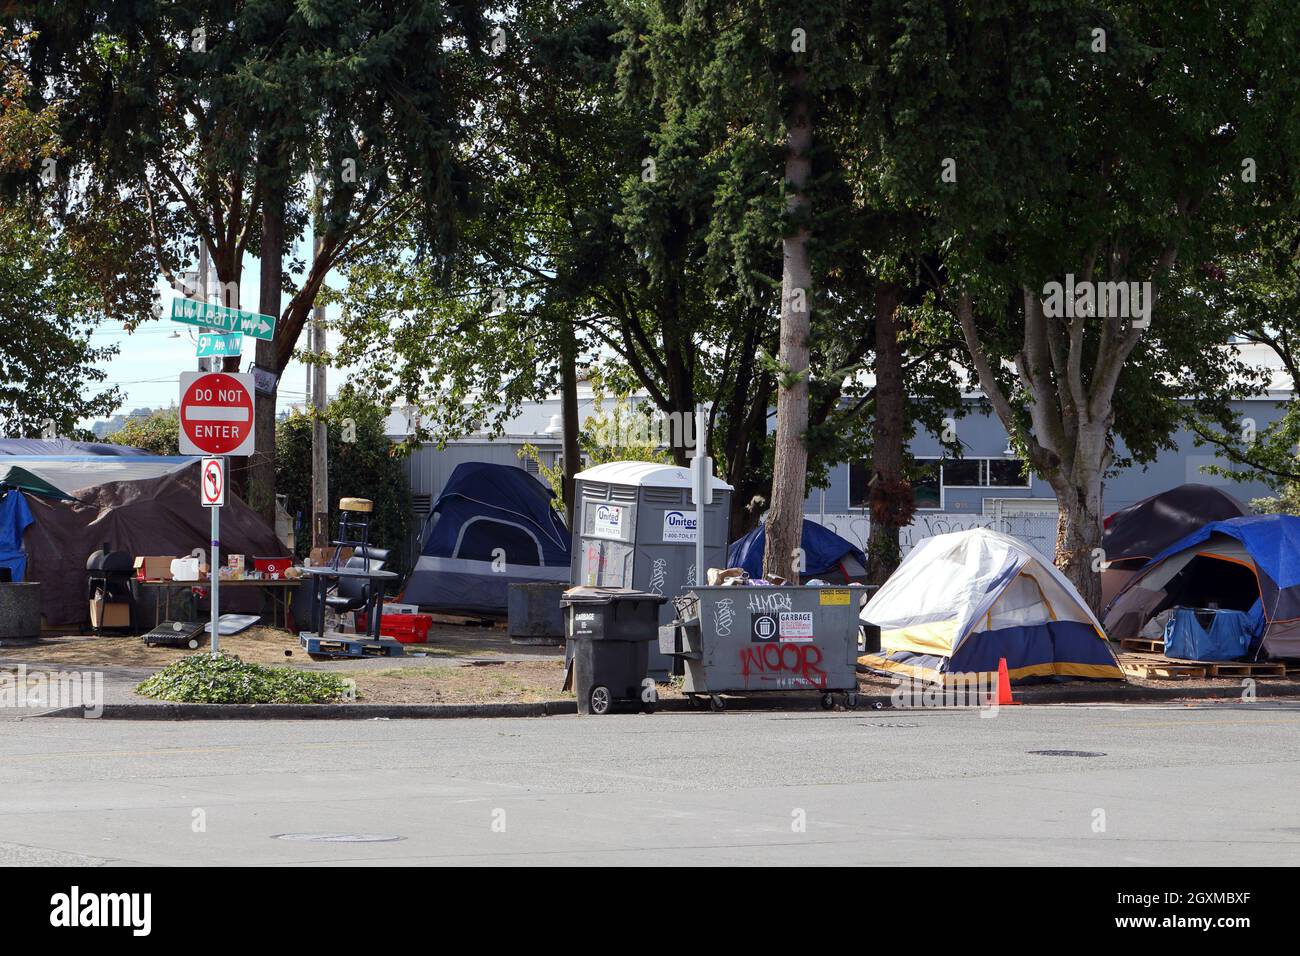 A homeless encampment at Leary Triangle, NW Leary Way and 9th Ave NW in the Ballard neighborhood, Seattle, Washington, September 11, 2021. Stock Photo